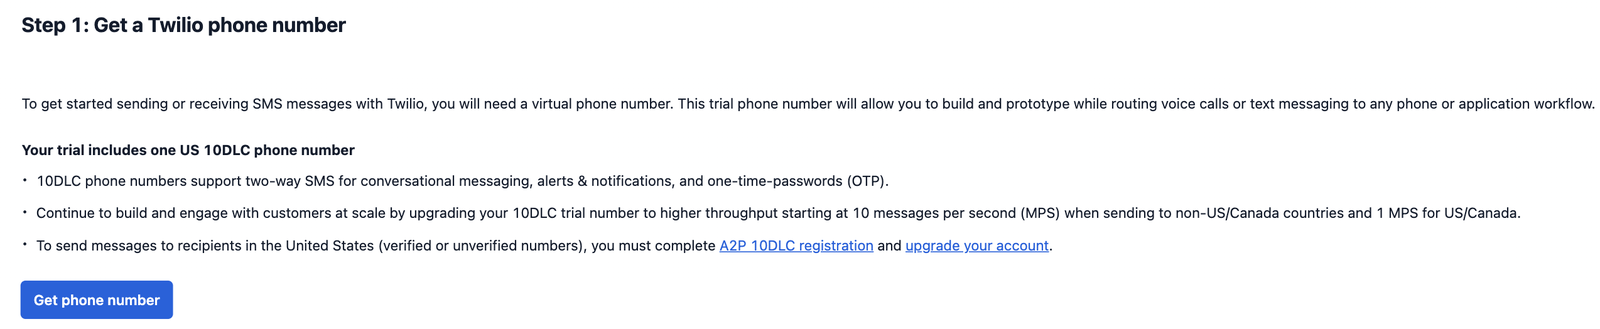 Free Trial -- Get your free Twilio Phone Number.